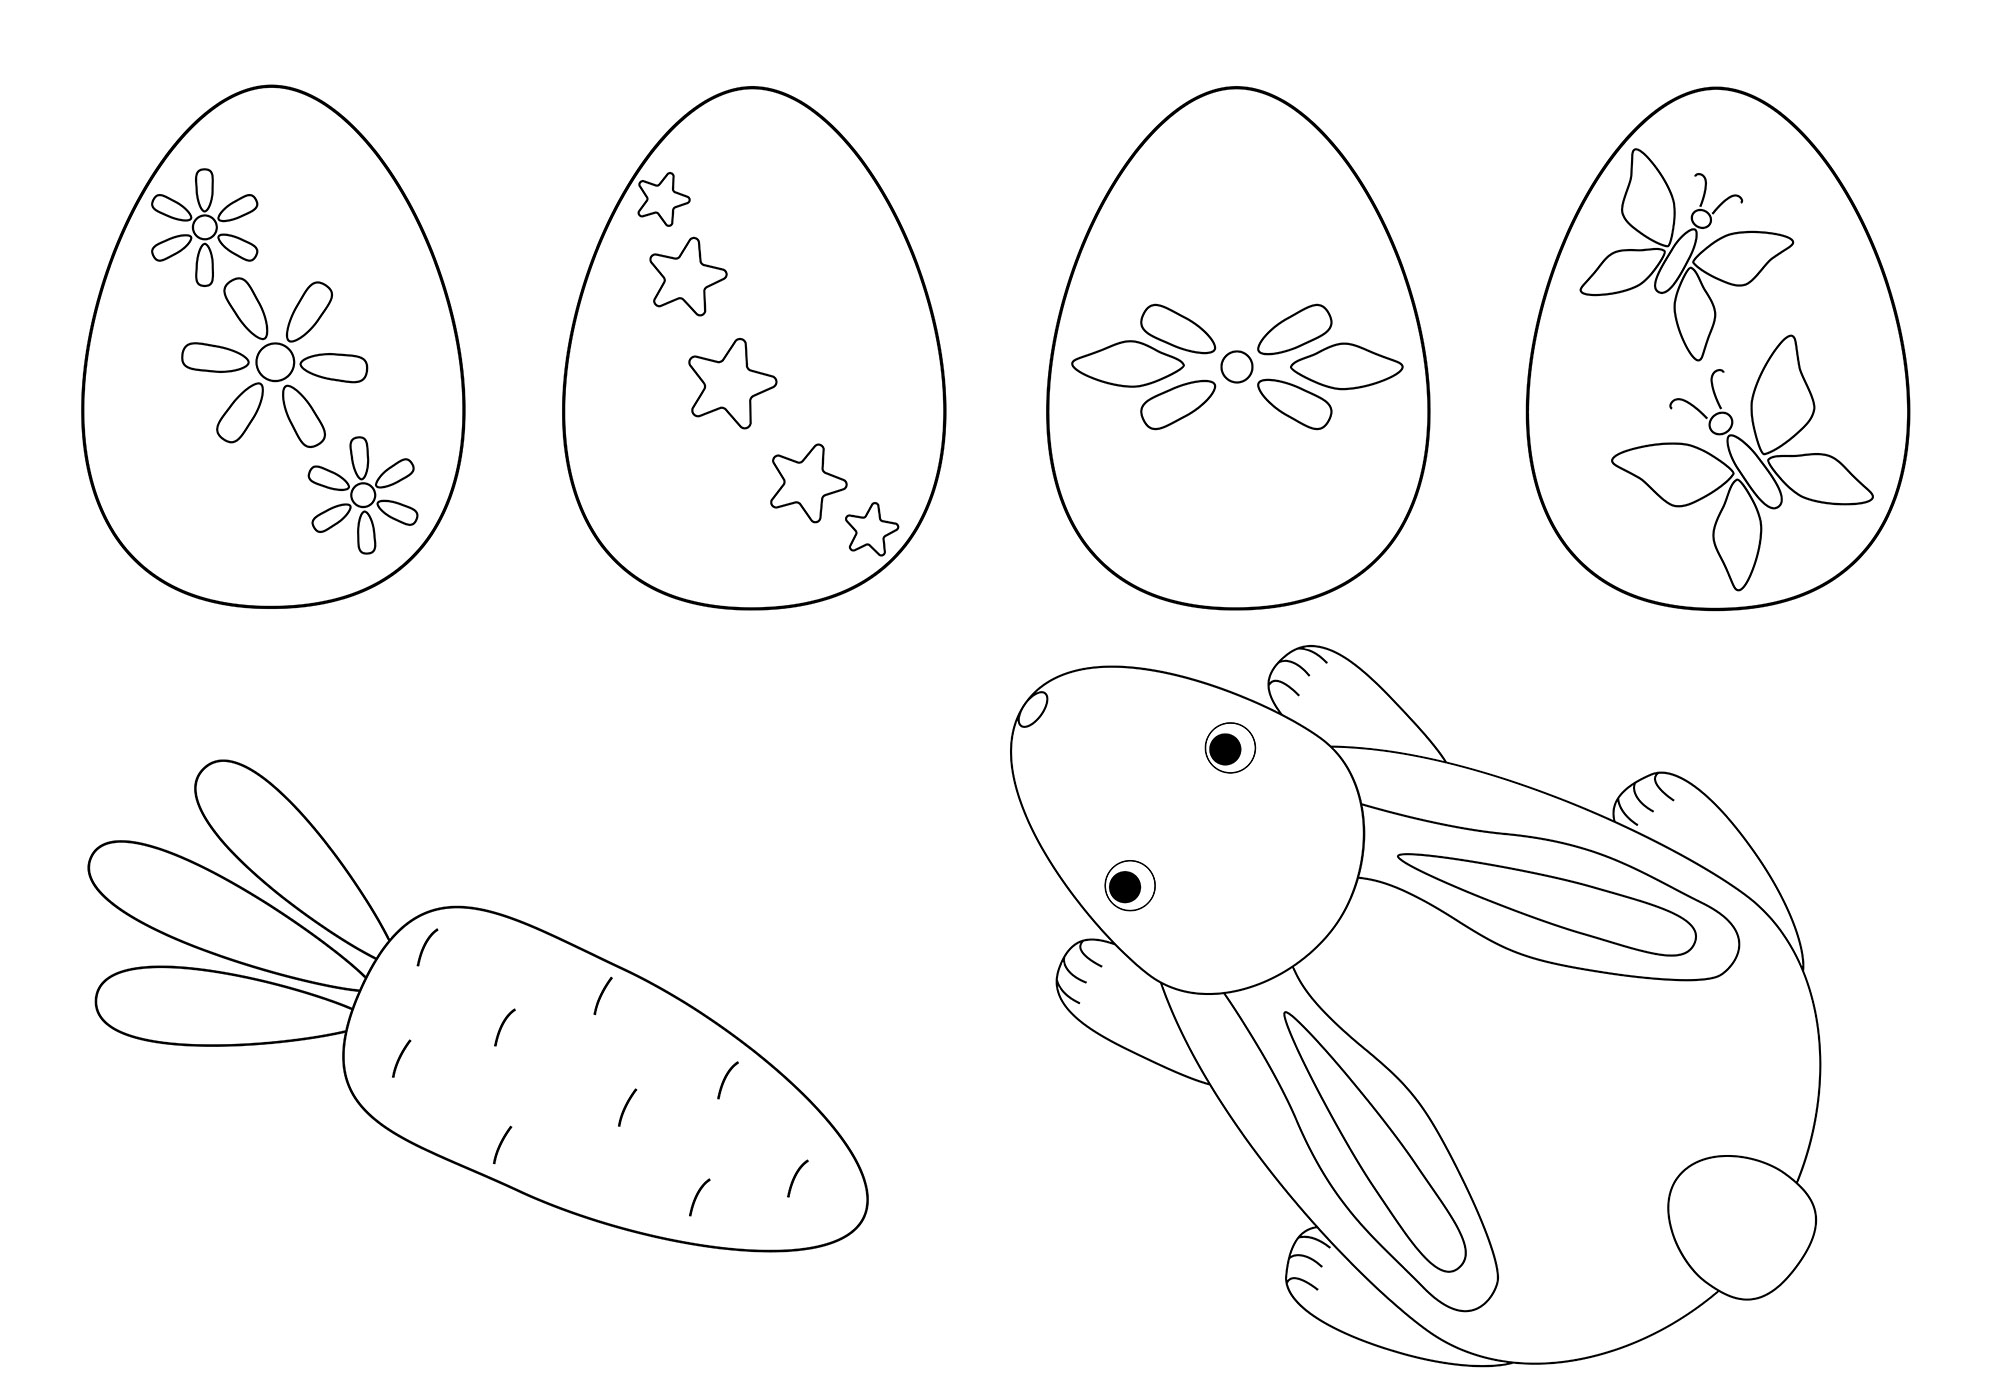 Coloring page with easter eggs and a bunny.